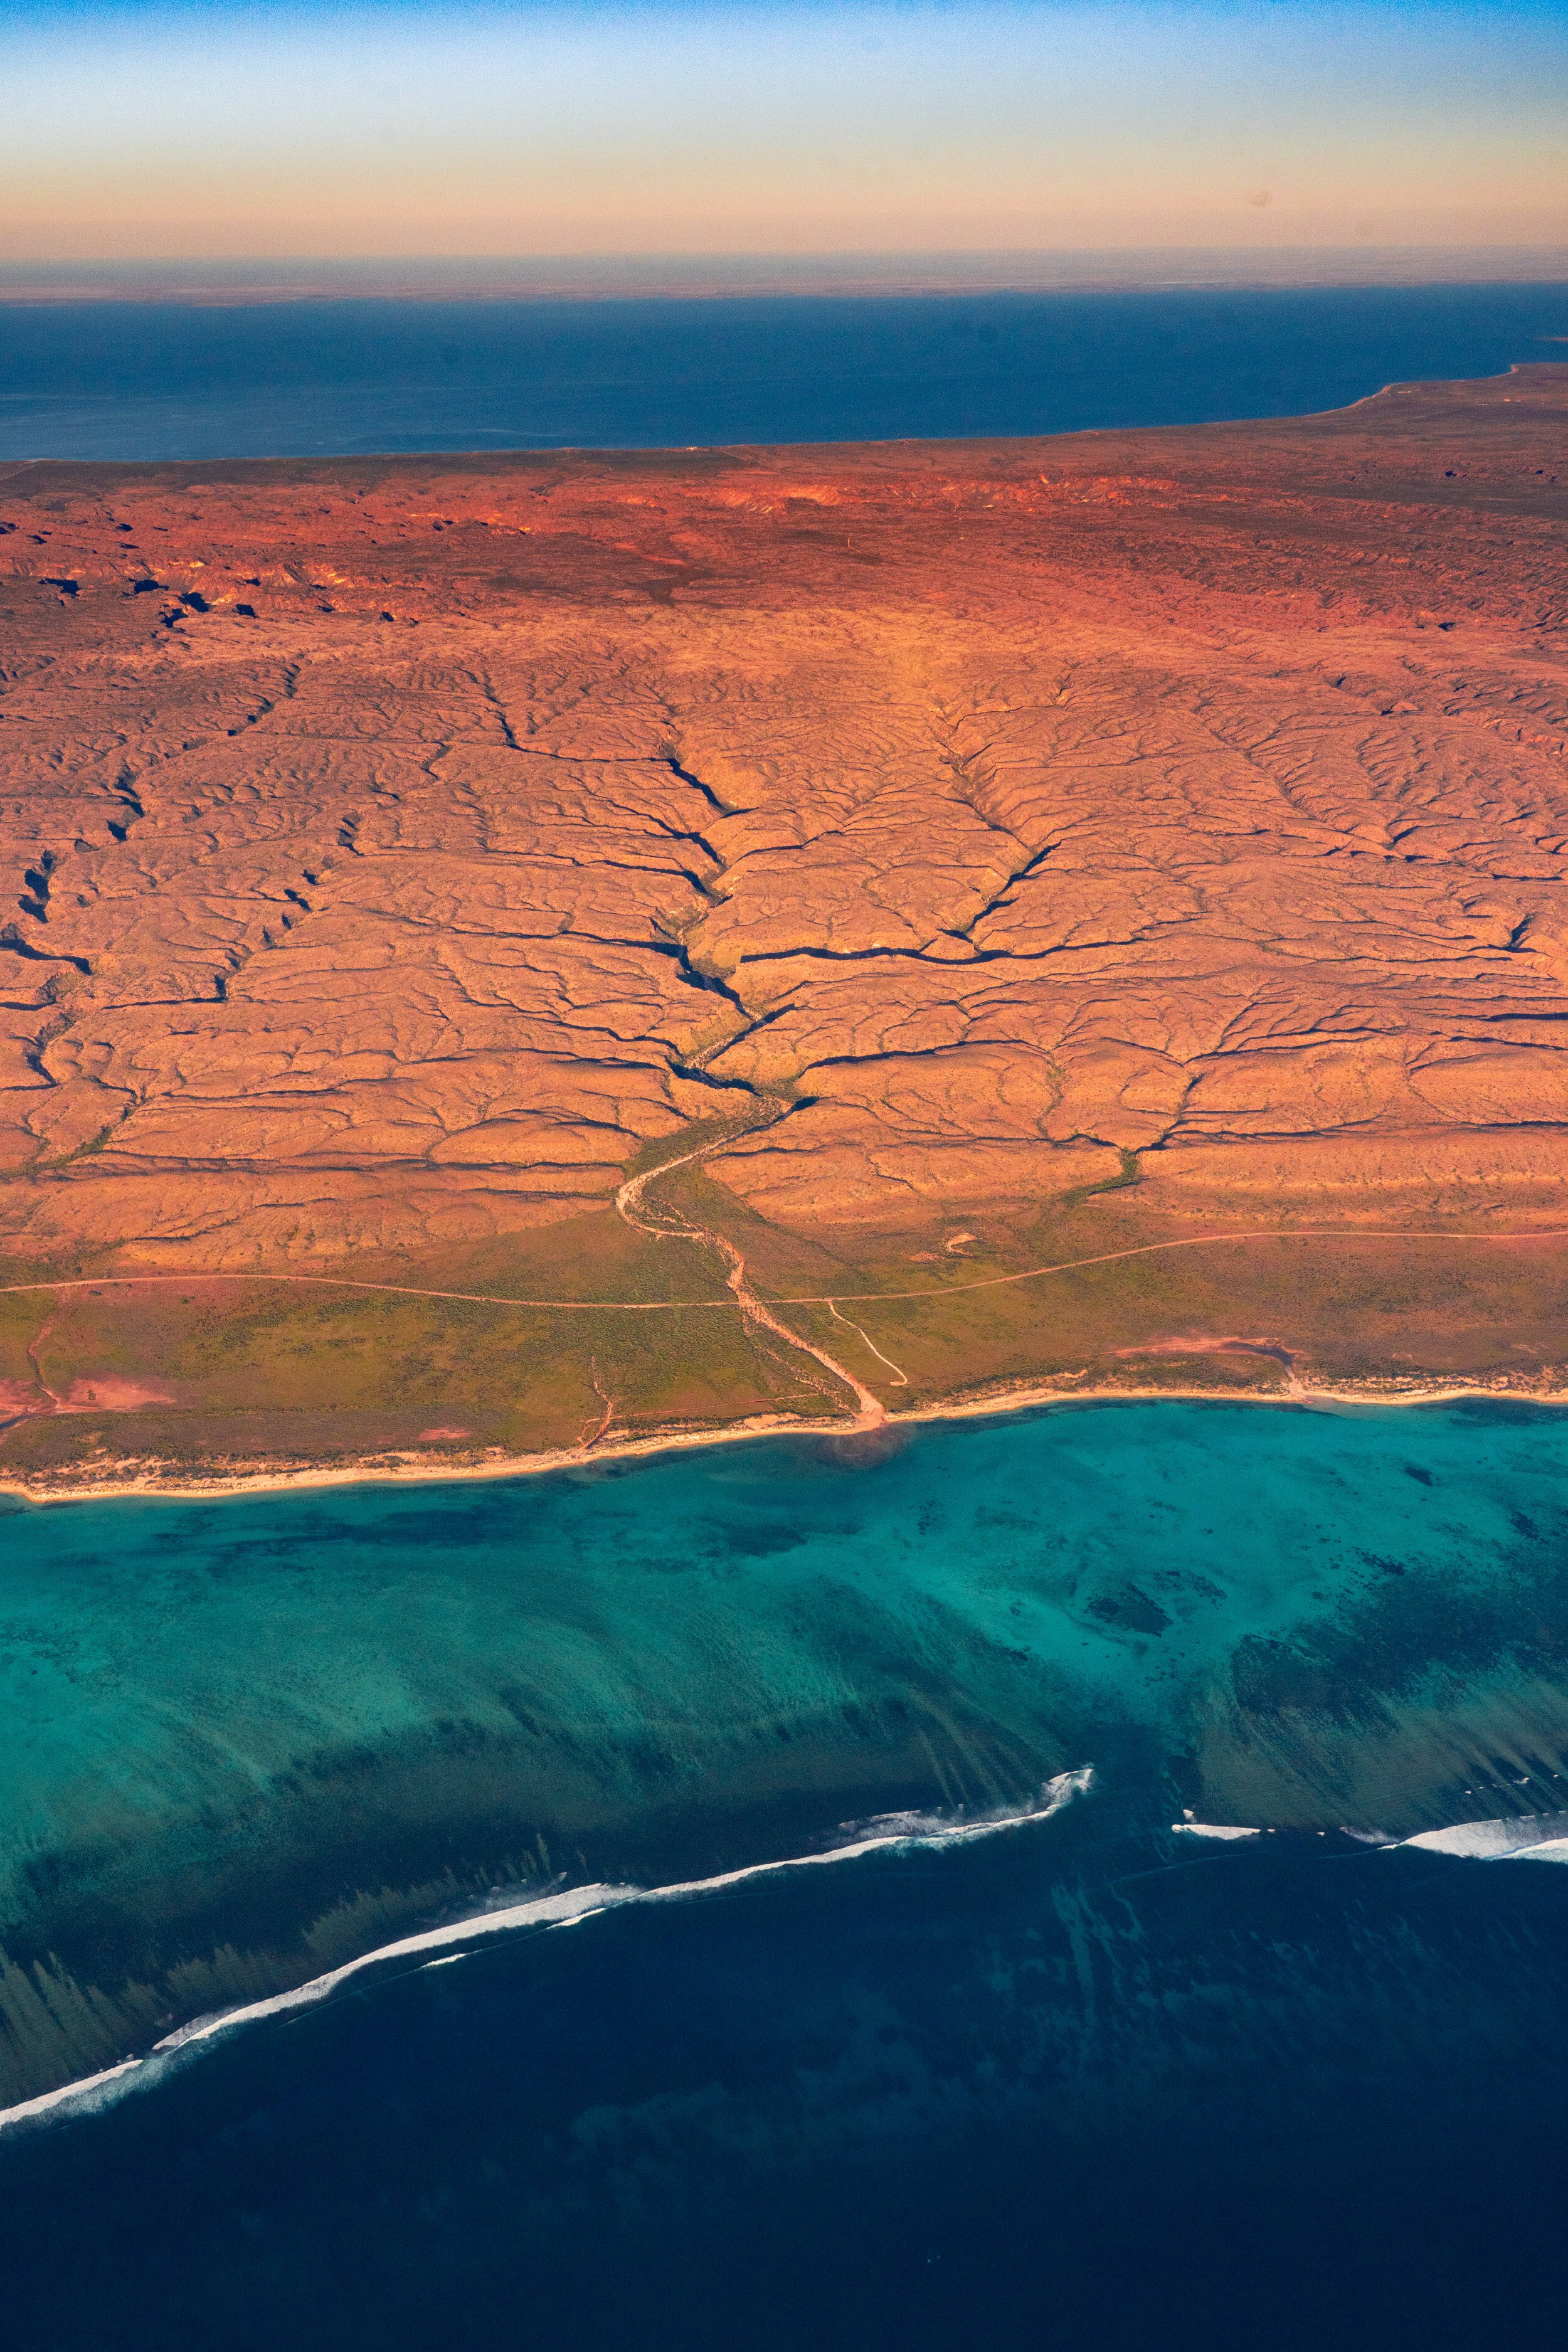 Aerial view of dark blue and turquoise waters with a reef below surface and red desert plains at dusk.